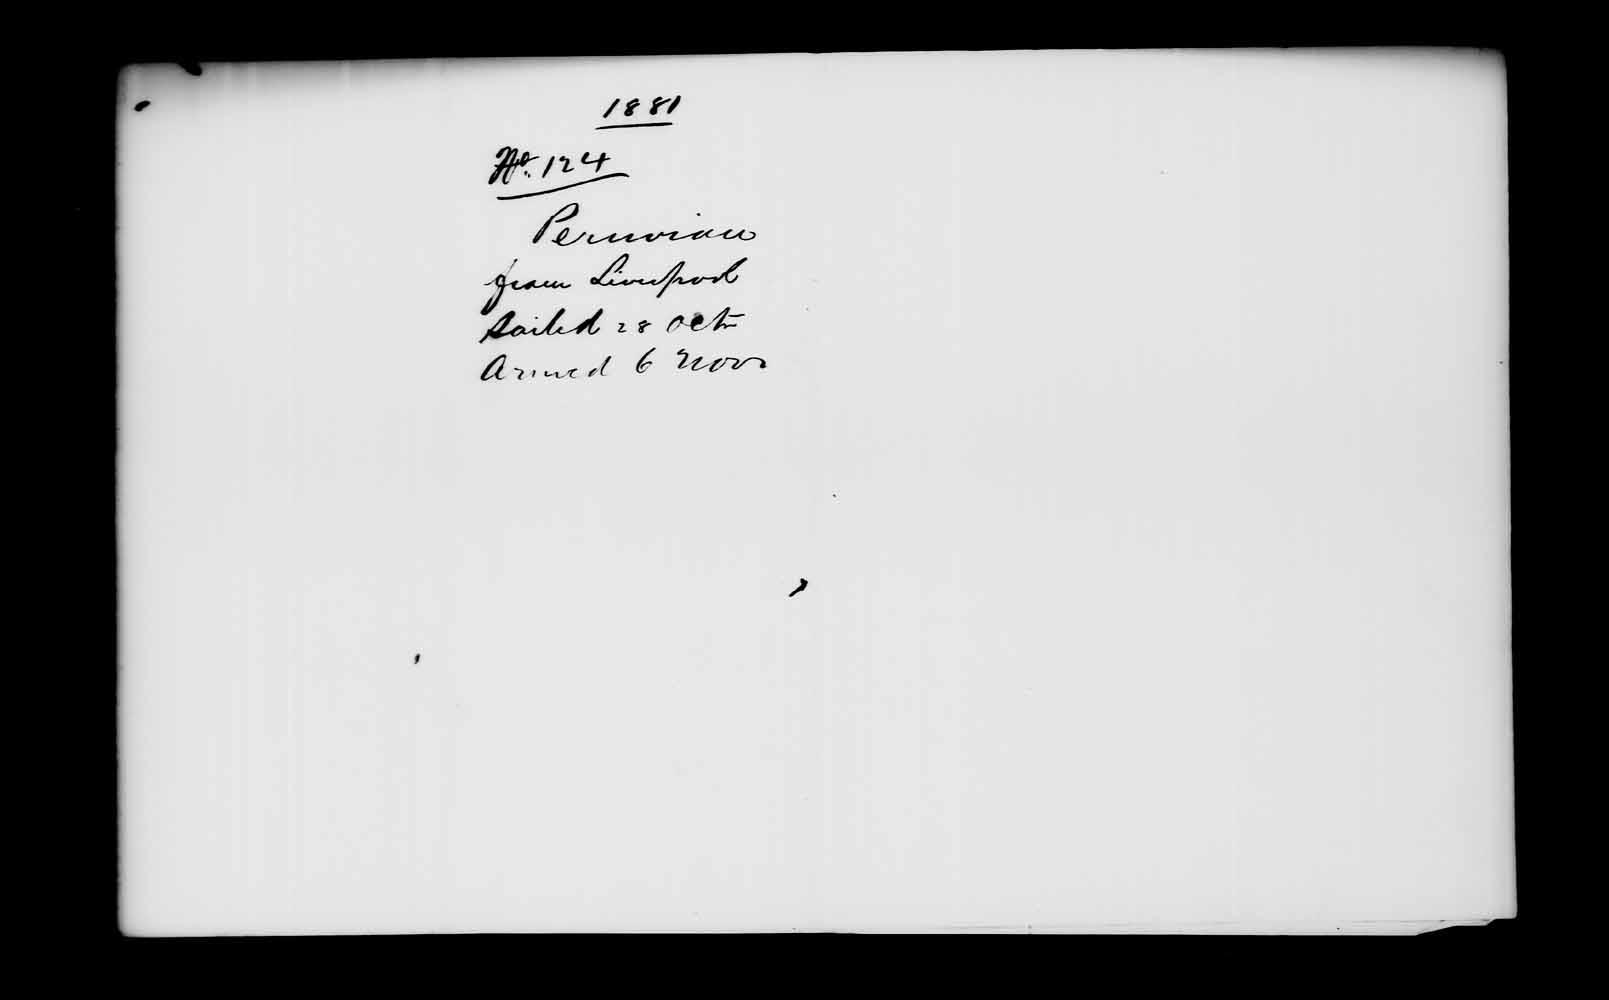 Digitized page of Passenger Lists for Image No.: e003541219